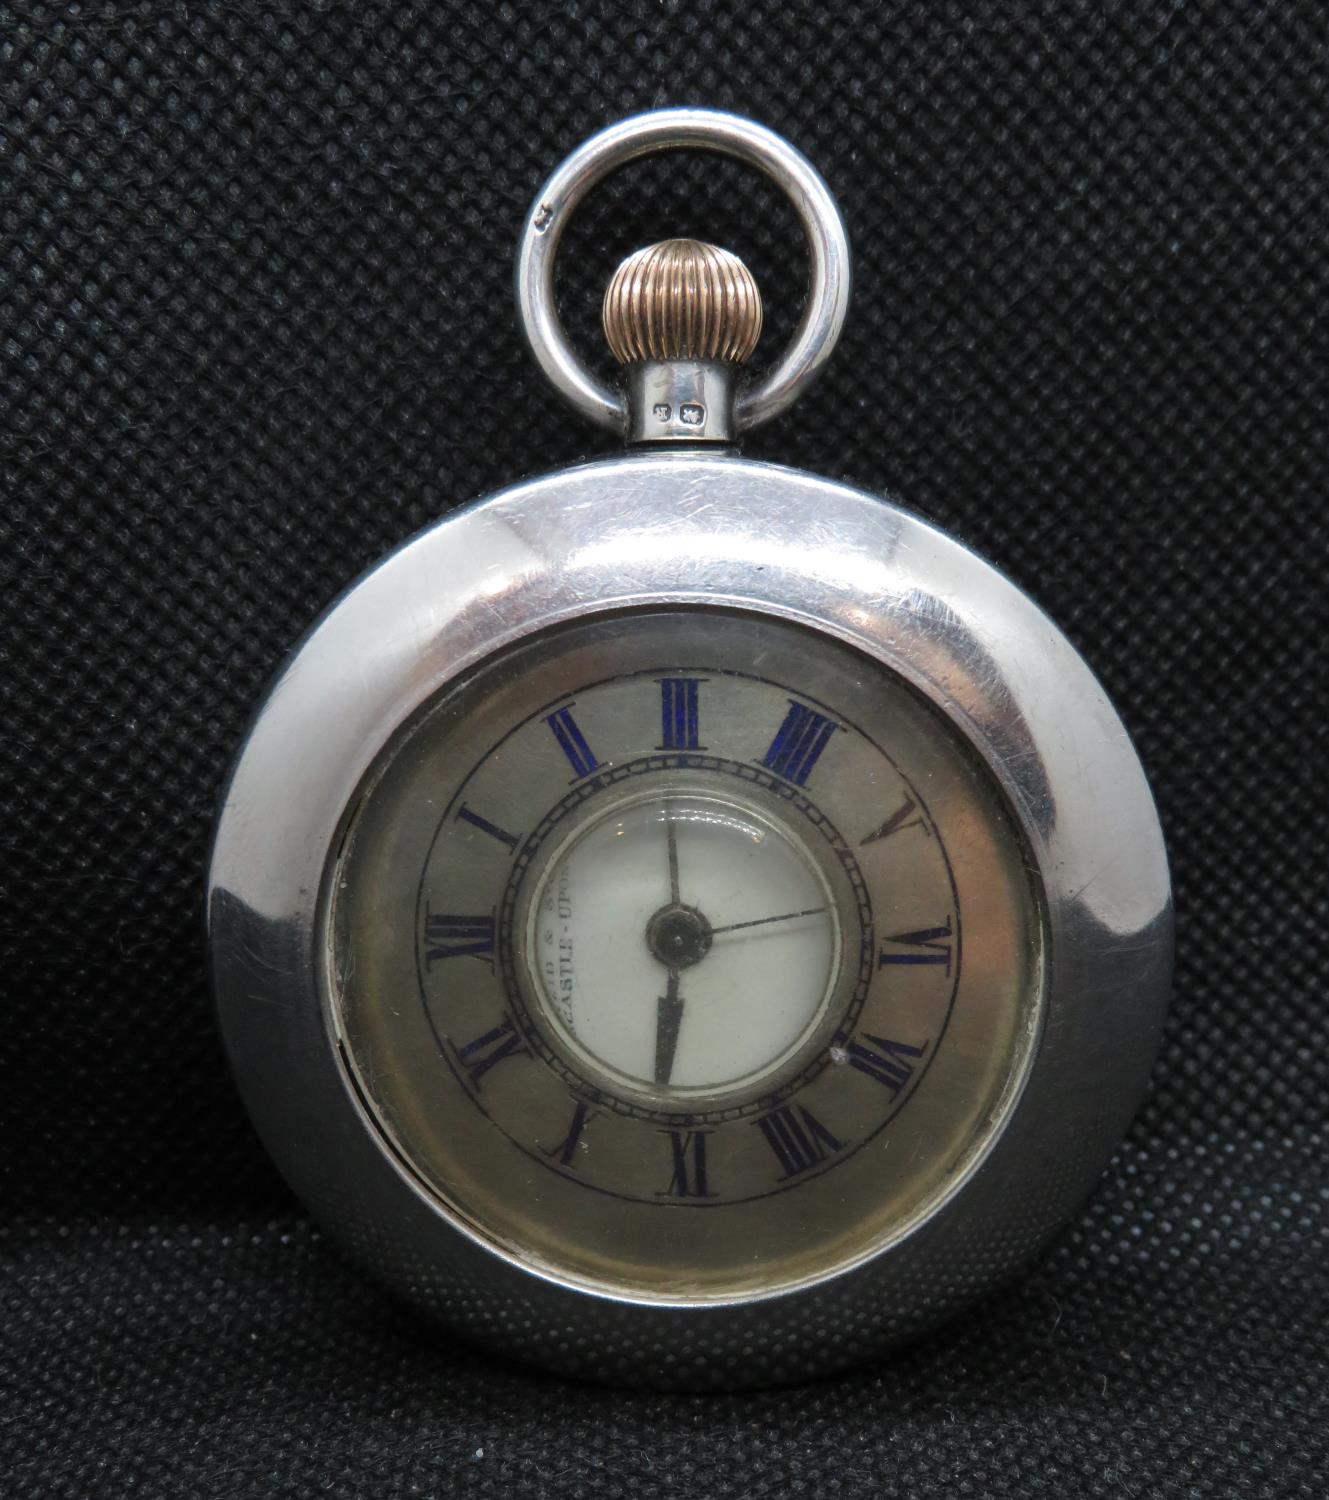 Reed and sons half hunter silver and blue enamel pocket watch in excellent condition signed Reed and